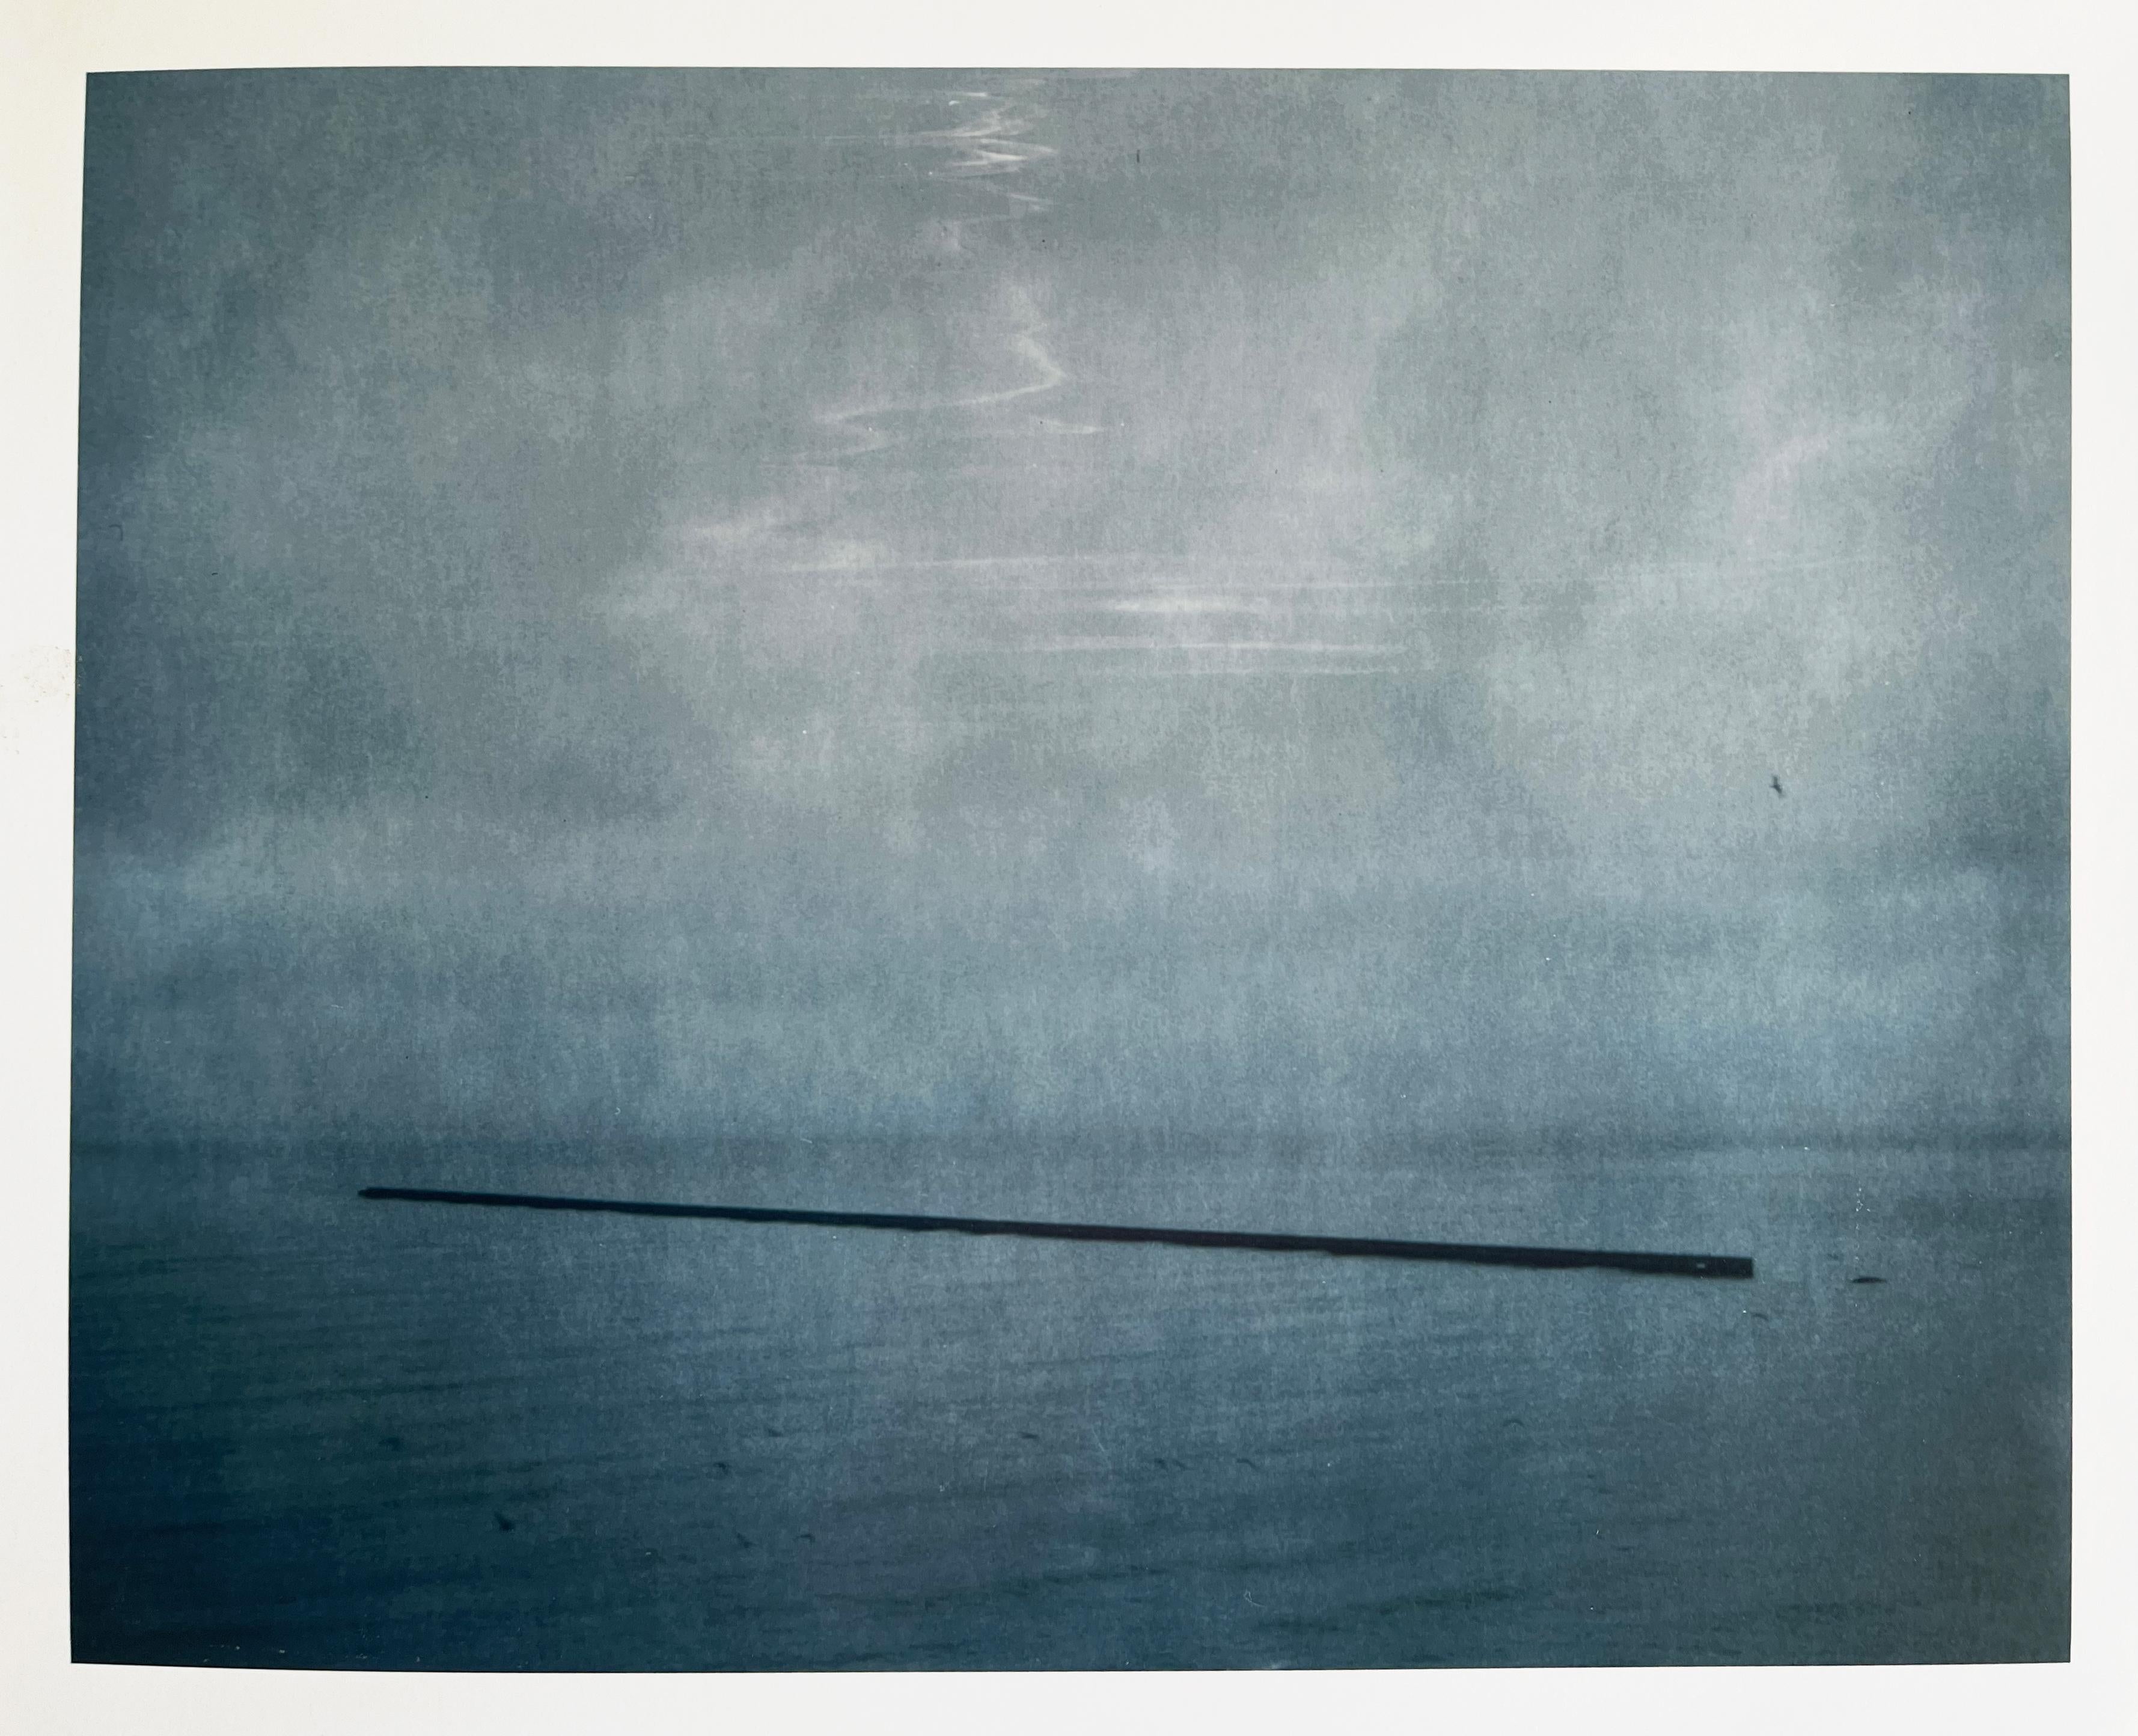 'Pier' - 2017, 

48x60cm. 
Edition of 7 plus 2 Artist Proofs. 
Archival C-print, based on the original Polaroid, not mounted.
Signature label and certificate.
Artist inventory PL2017-240. 

Kirsten Thys van den Audenaerde is a self-taught freelance